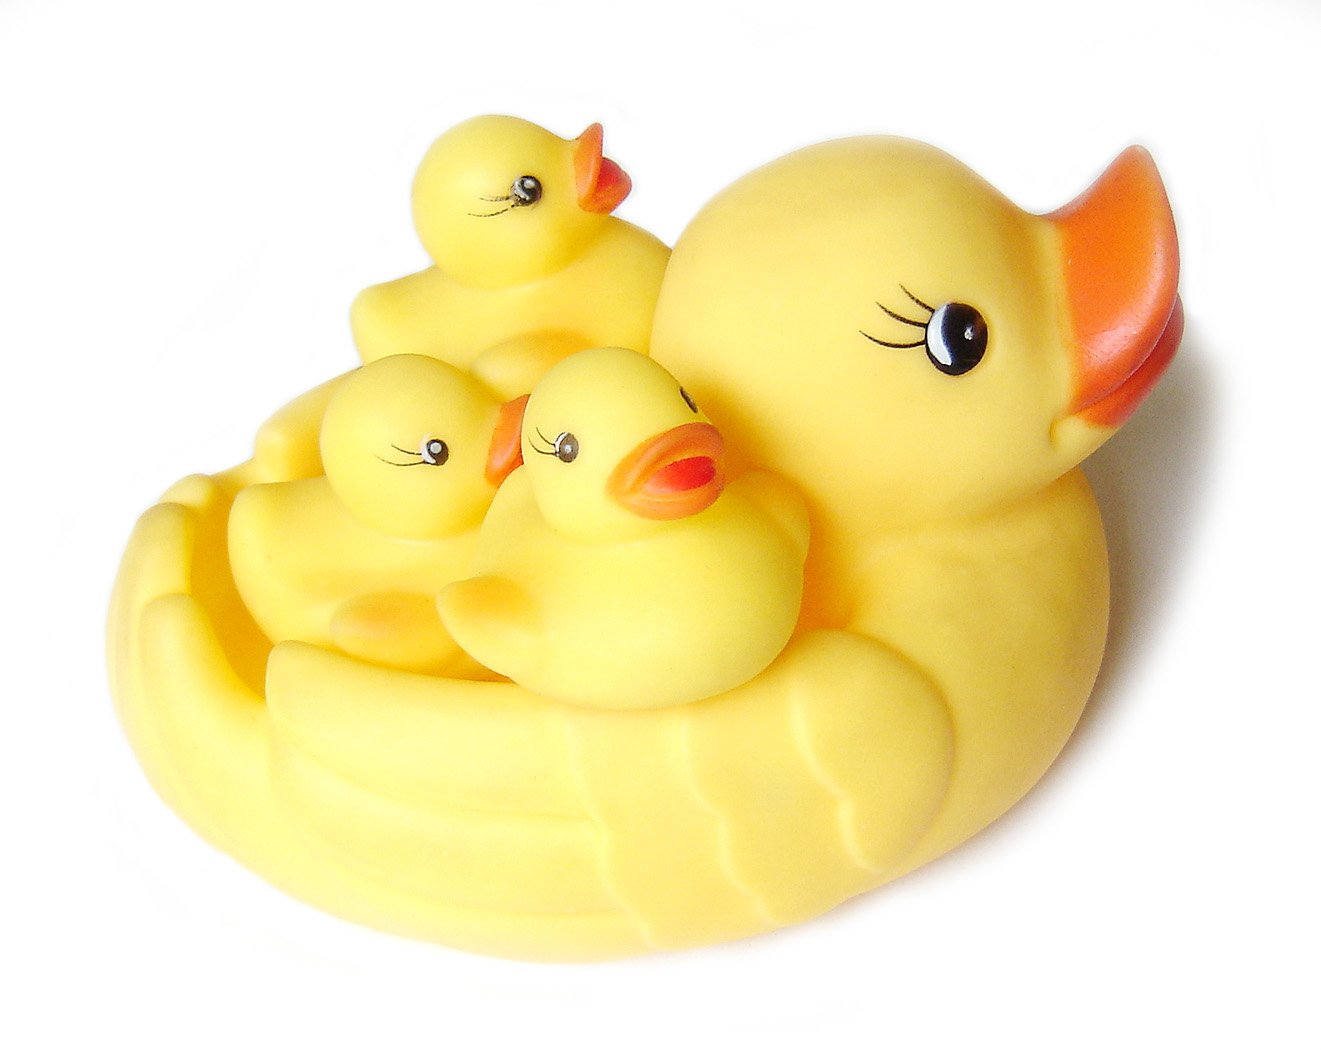 there is a rubber duck with five rubber ducks on it